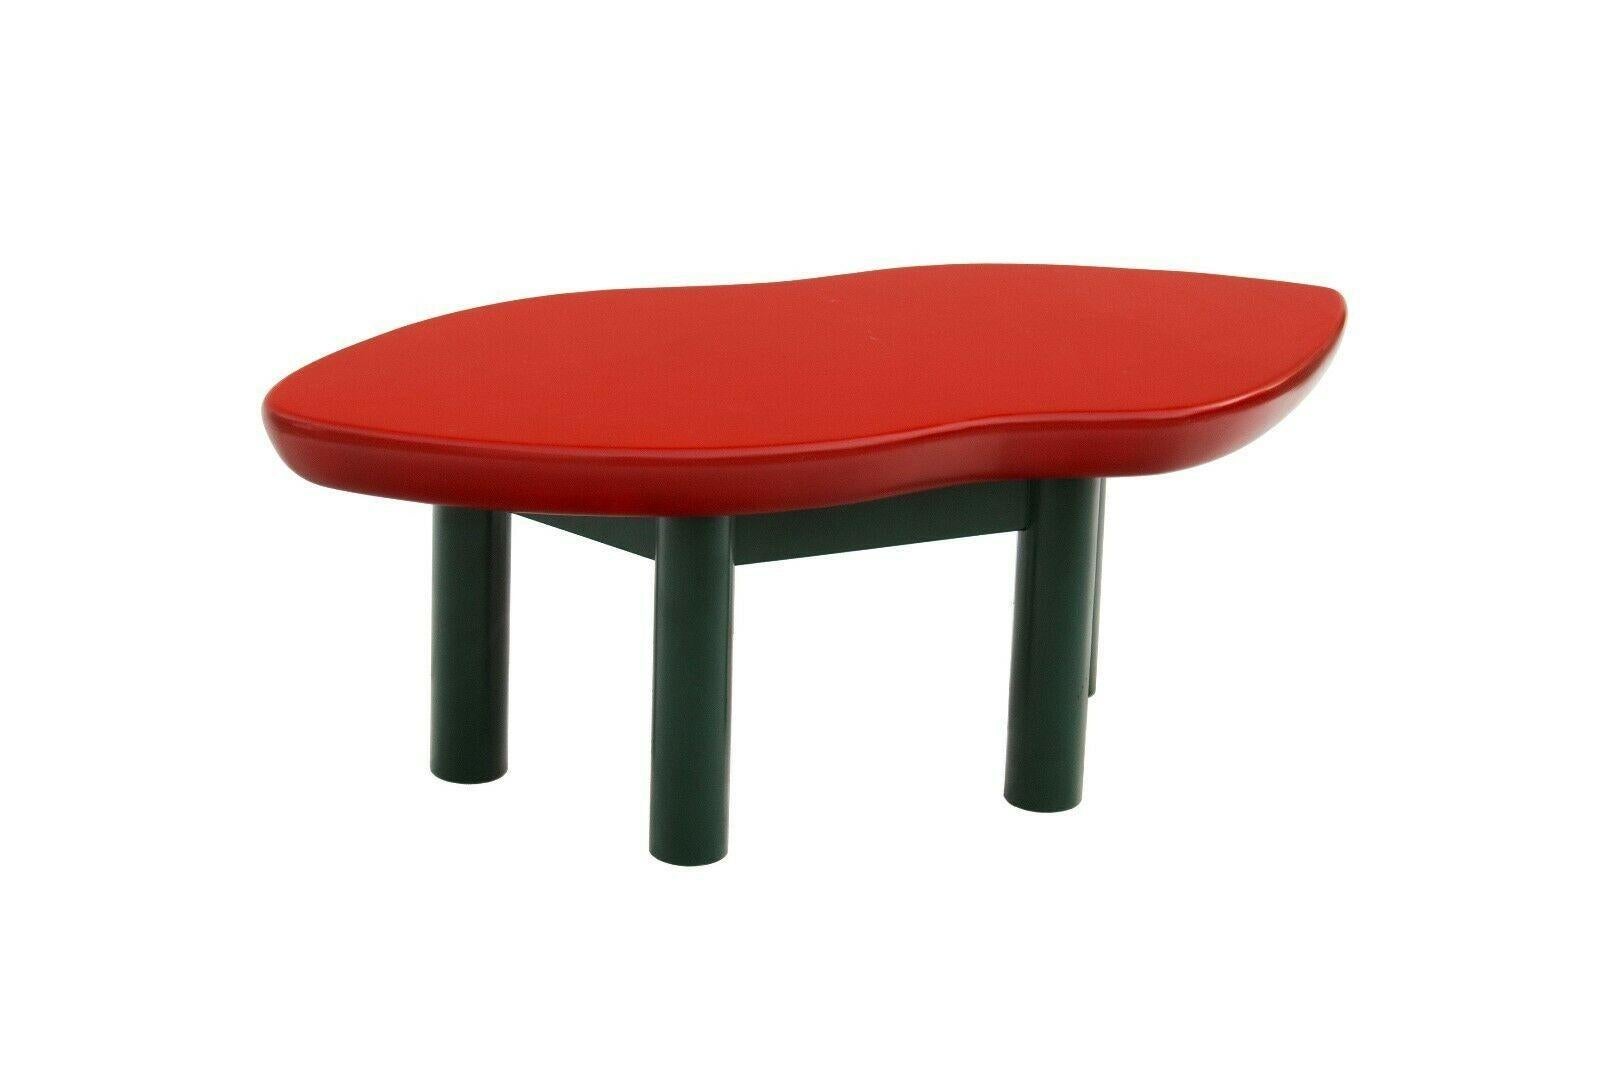 USA, 1980s
Joan Crawford lips coffee table, designed by Jay Spectre for Jay Spectre Inc. This is a smaller size for a cocktail table, yet also a very usable size. It has a glossy red lacquered lip-shaped top with hunter green lacquered legs. 
This